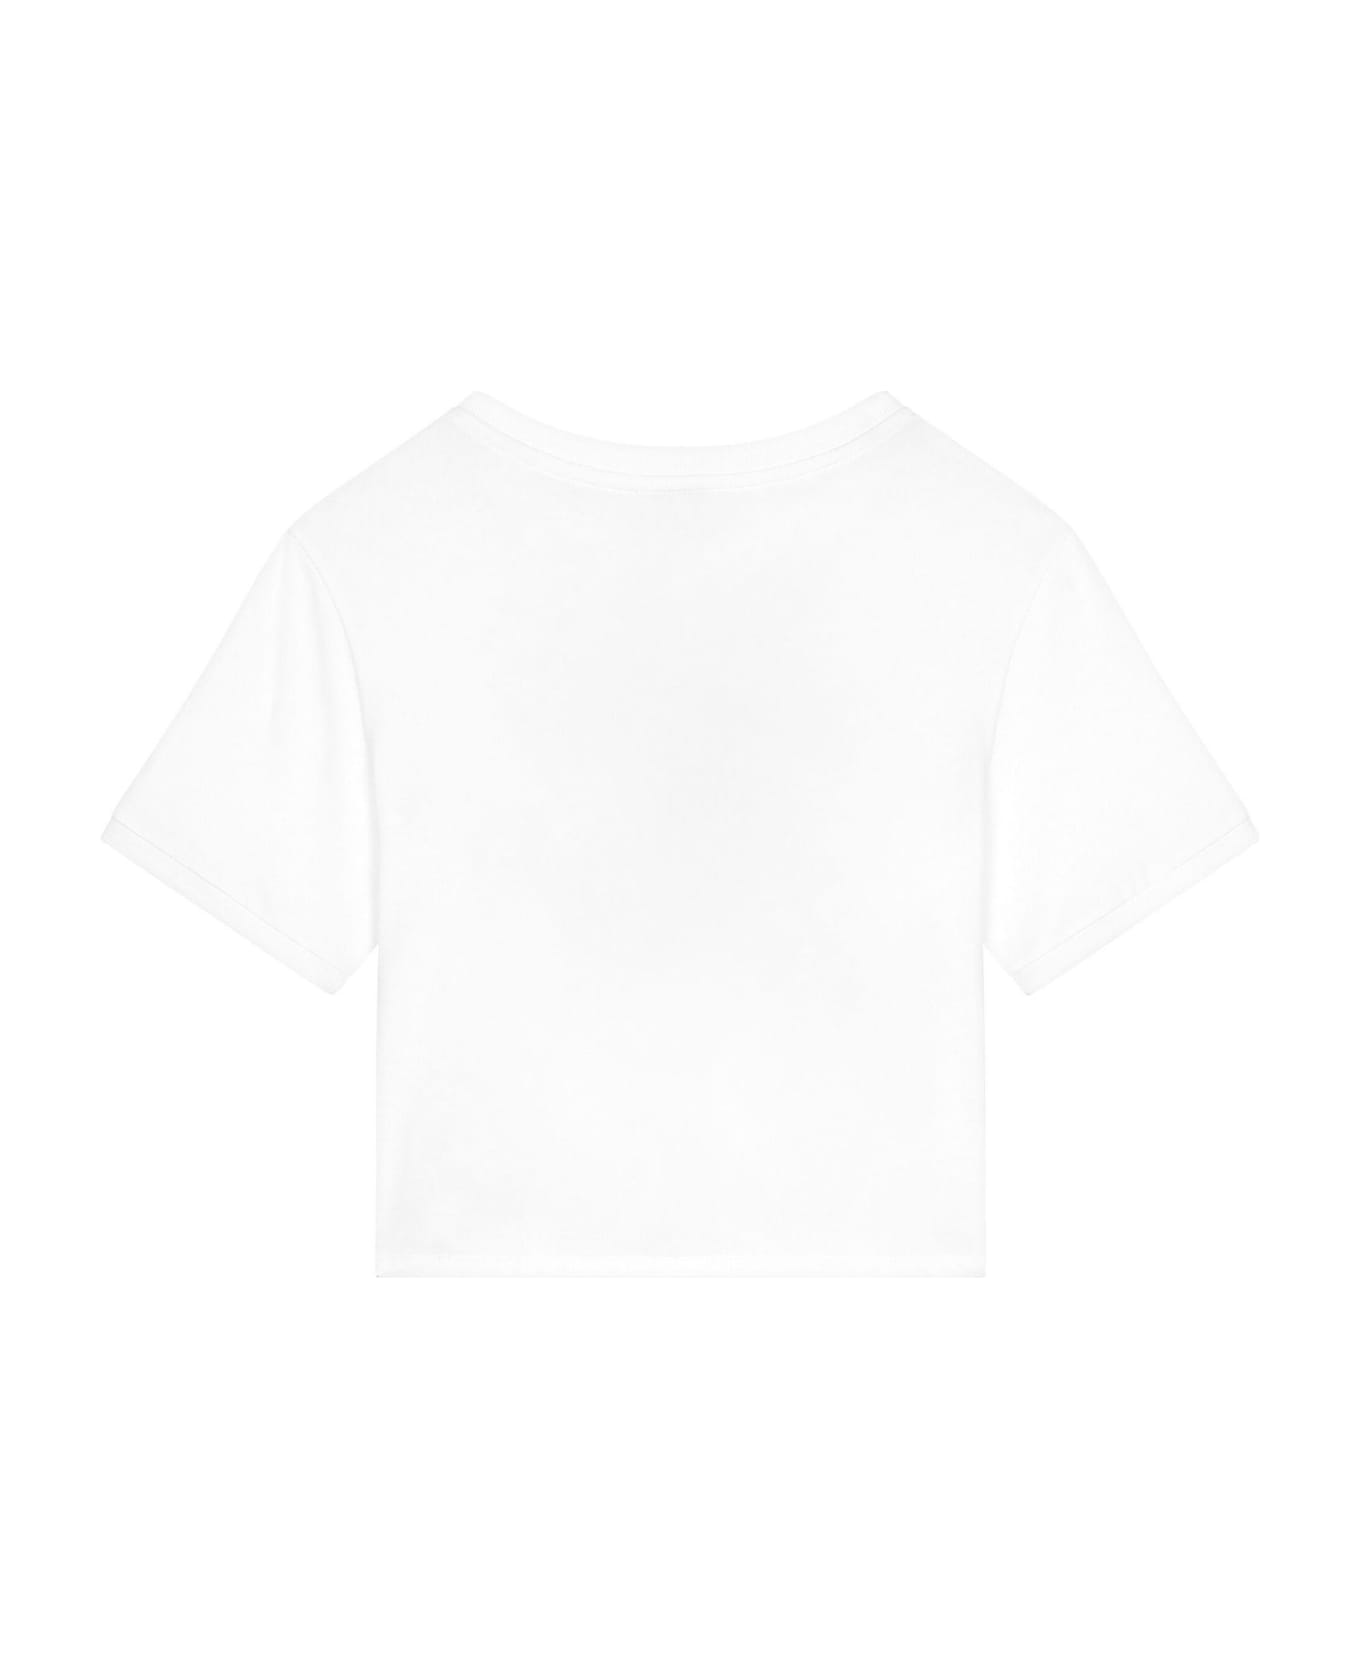 Dolce & Gabbana T-shirts And Polos White - White Tシャツ＆ポロシャツ